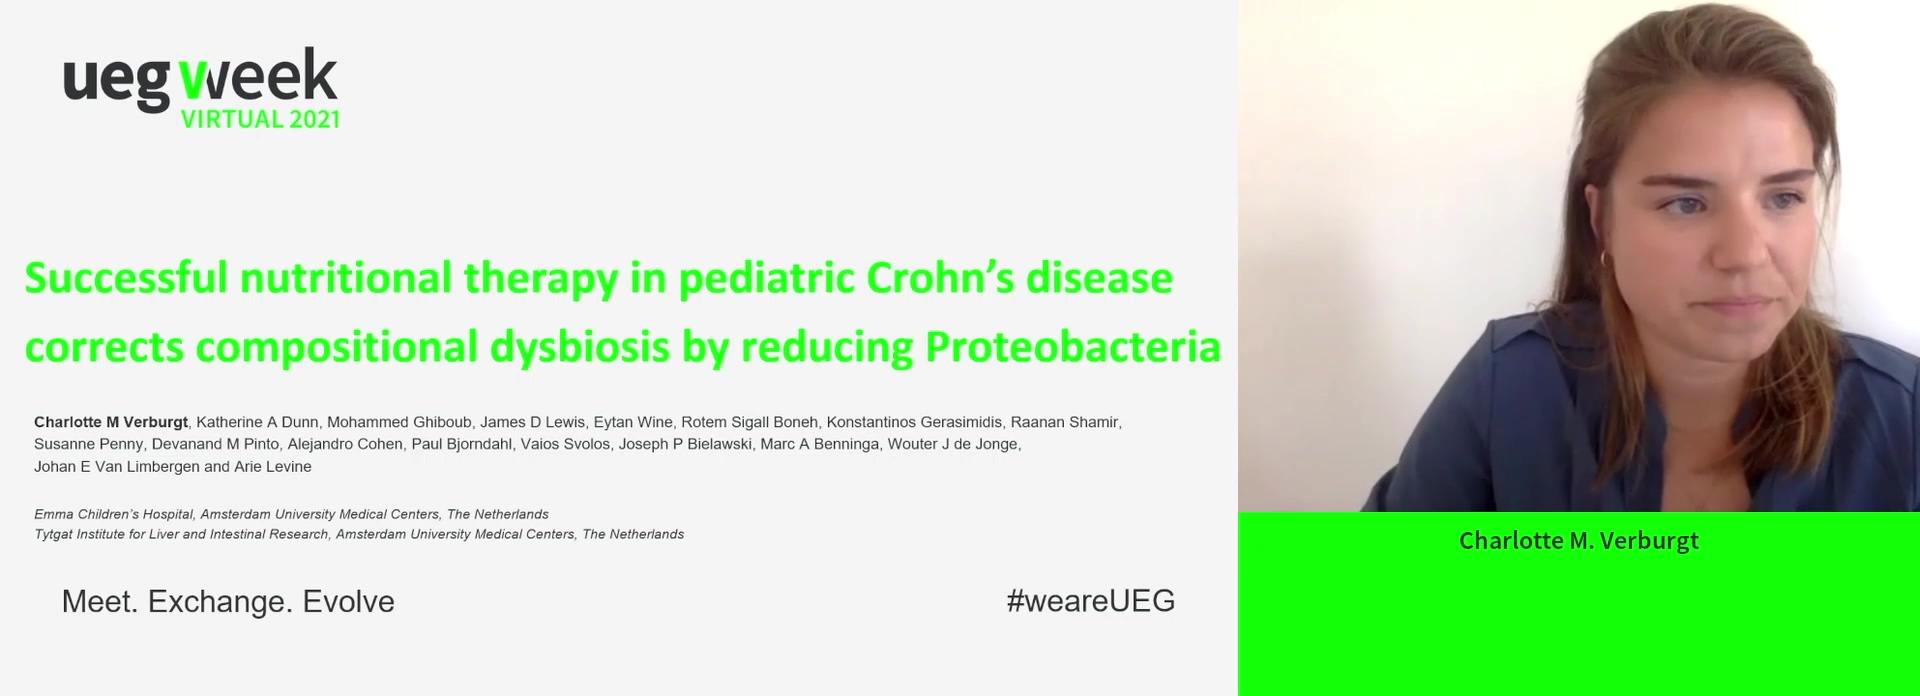 SUCCESSFUL DIETARY THERAPY IN PEDIATRIC CROHN’S DISEASE CORRECTS COMPOSITIONAL DYSBIOSIS BY REDUCING PROTEOBACTERIA